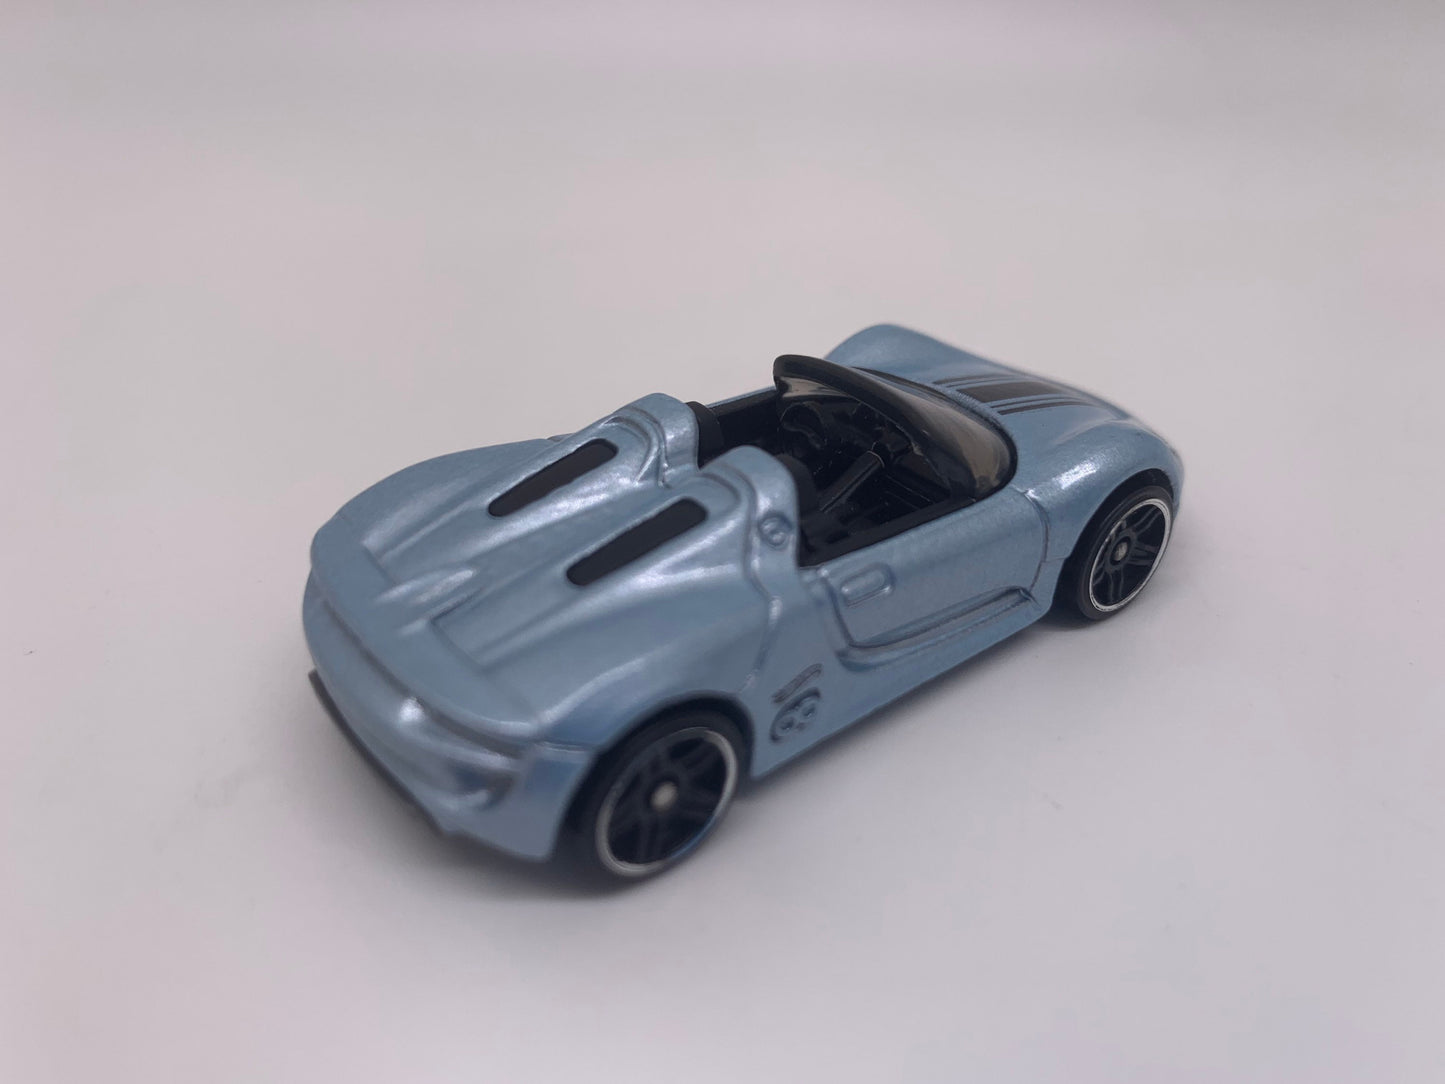 Hot Wheels Porsche 918 Spyder Concept Pearl Light Blue HW Exotics Perfect Birthday Gift Miniature Collectable Model Toy Car